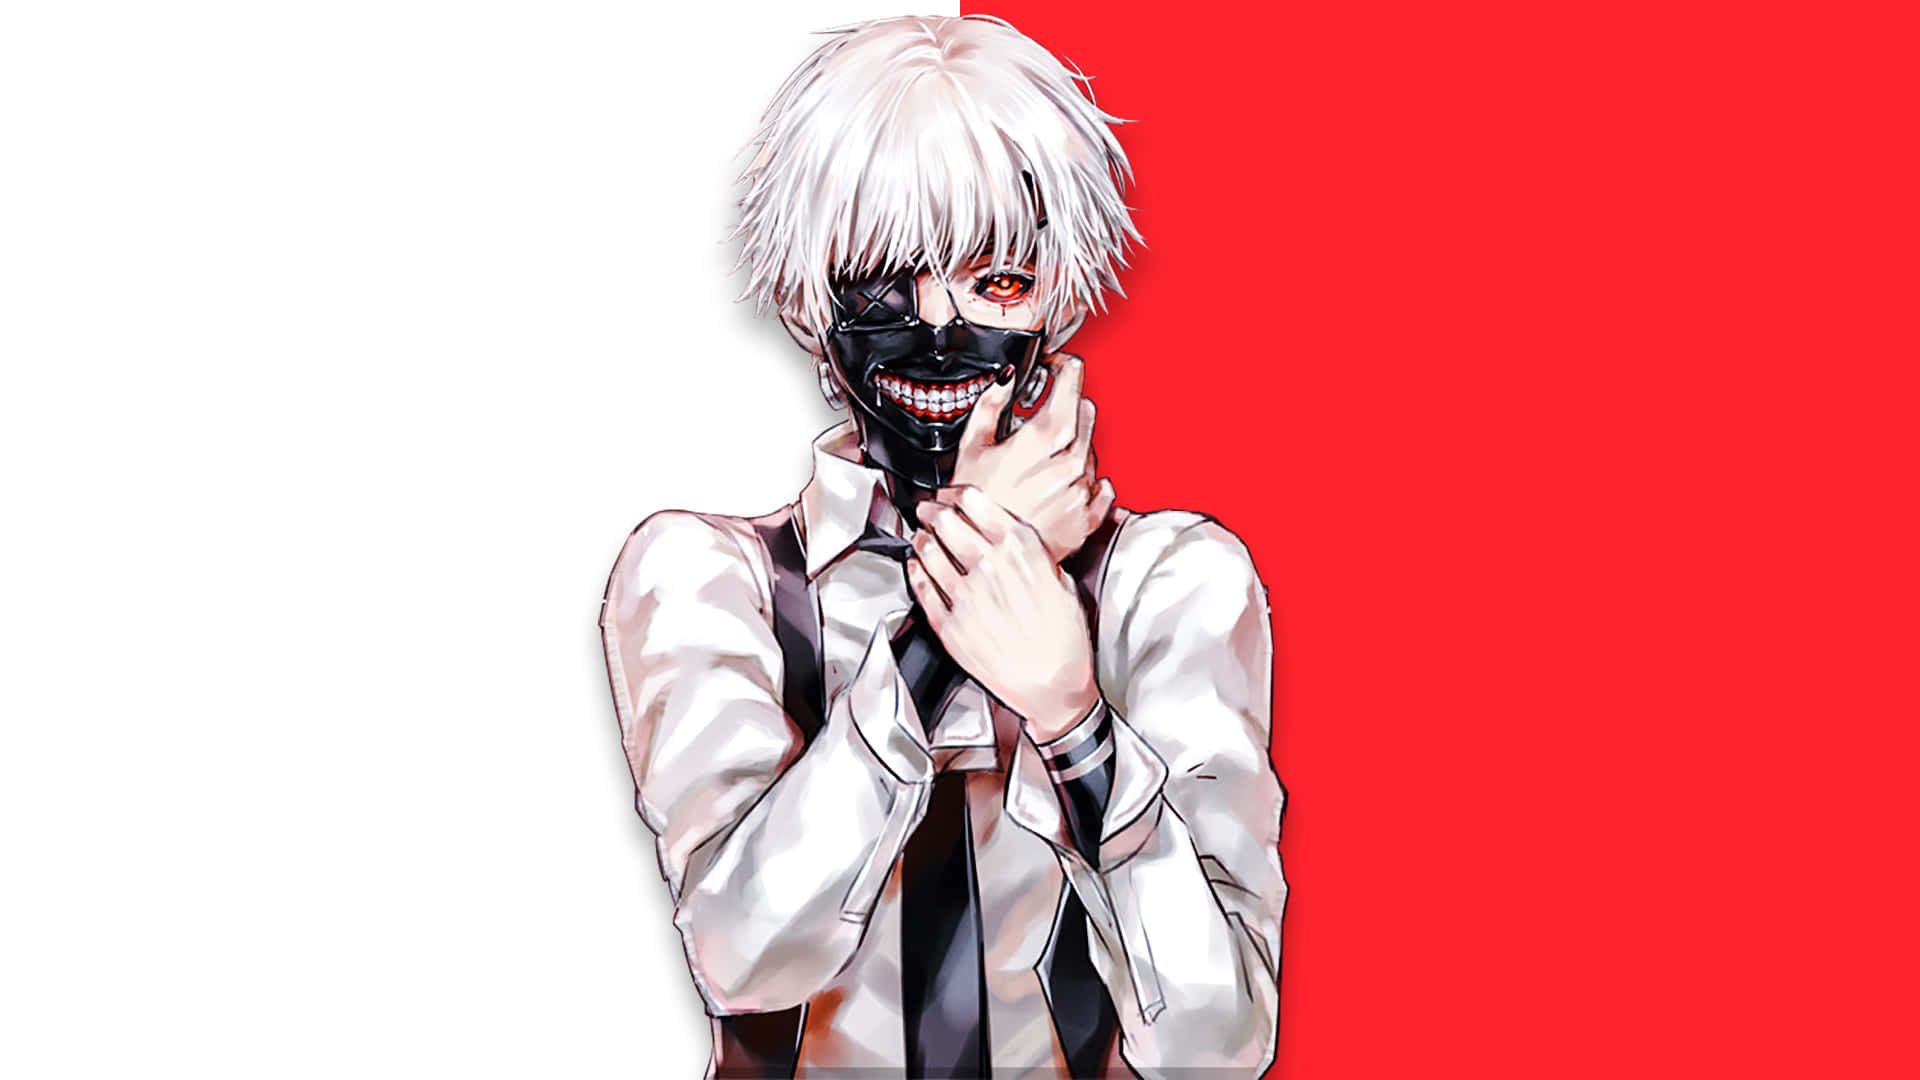 Celebrate The Anime Series Tokyo Ghoul With An Epic Desktop Background Wallpaper